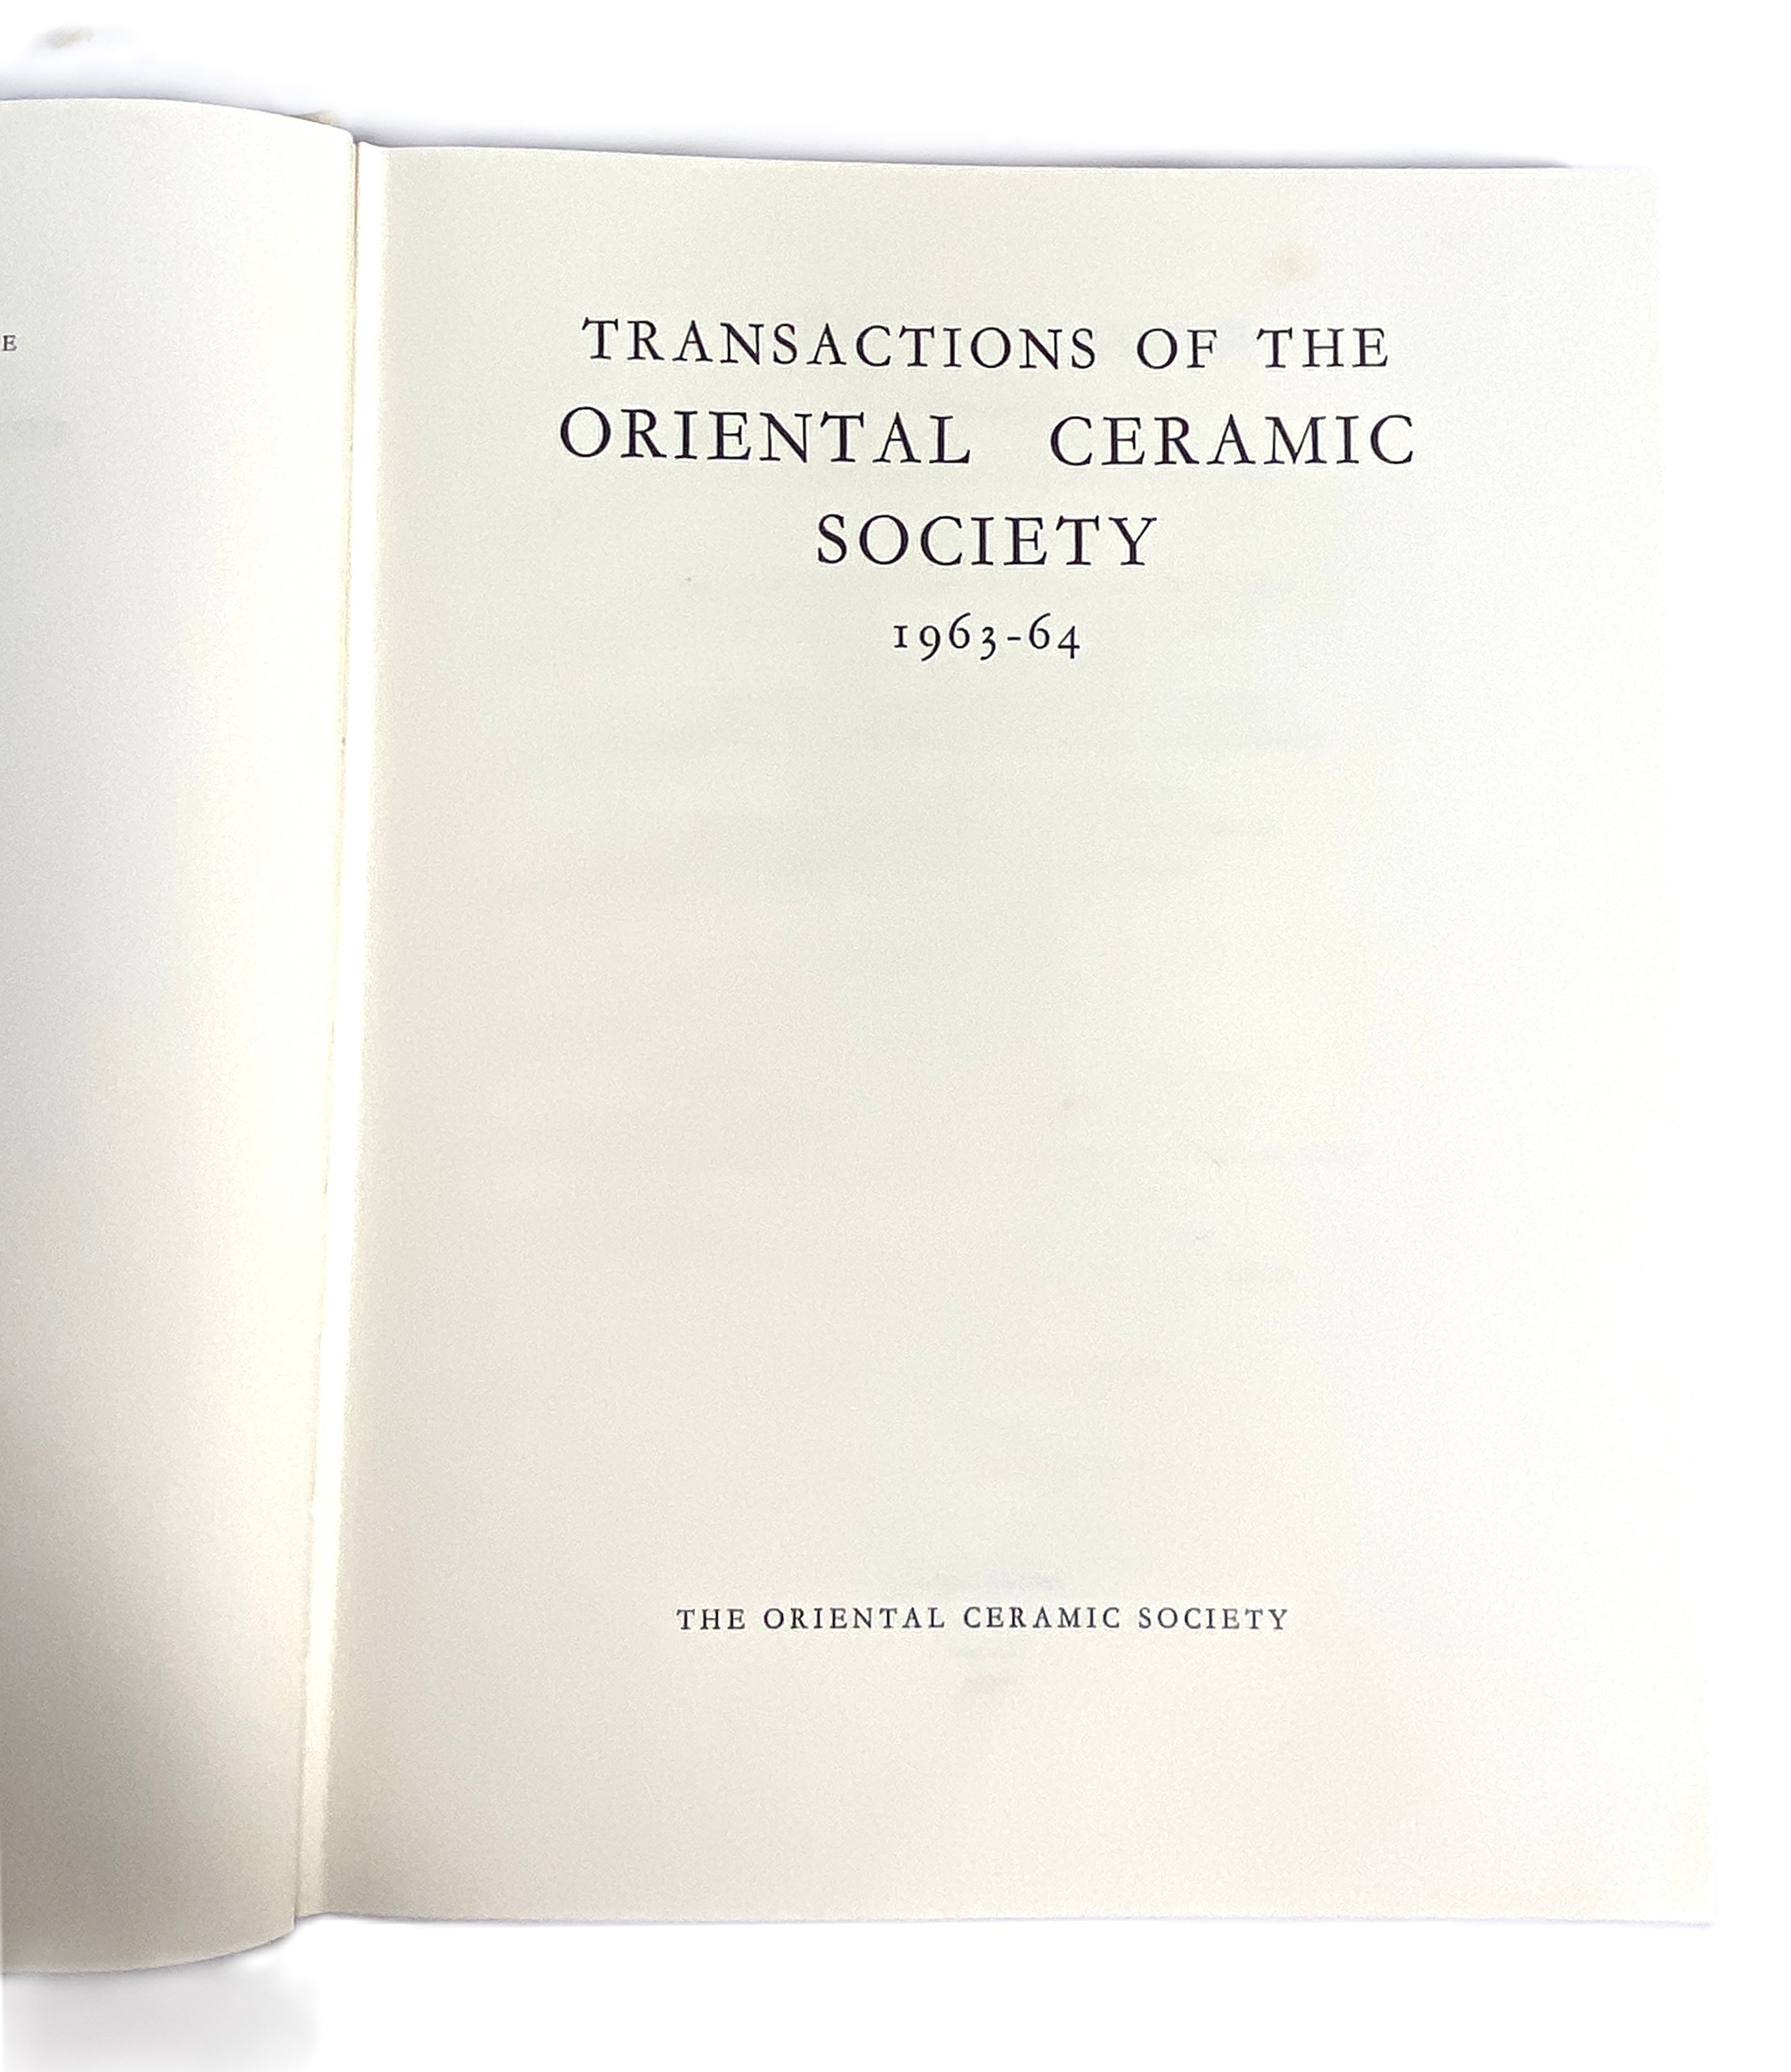 CHINESE COLLECTORS: ‘Transactions of the Oriental Ceramic Society, circa 1970-80, 11 volumes, - Image 4 of 7